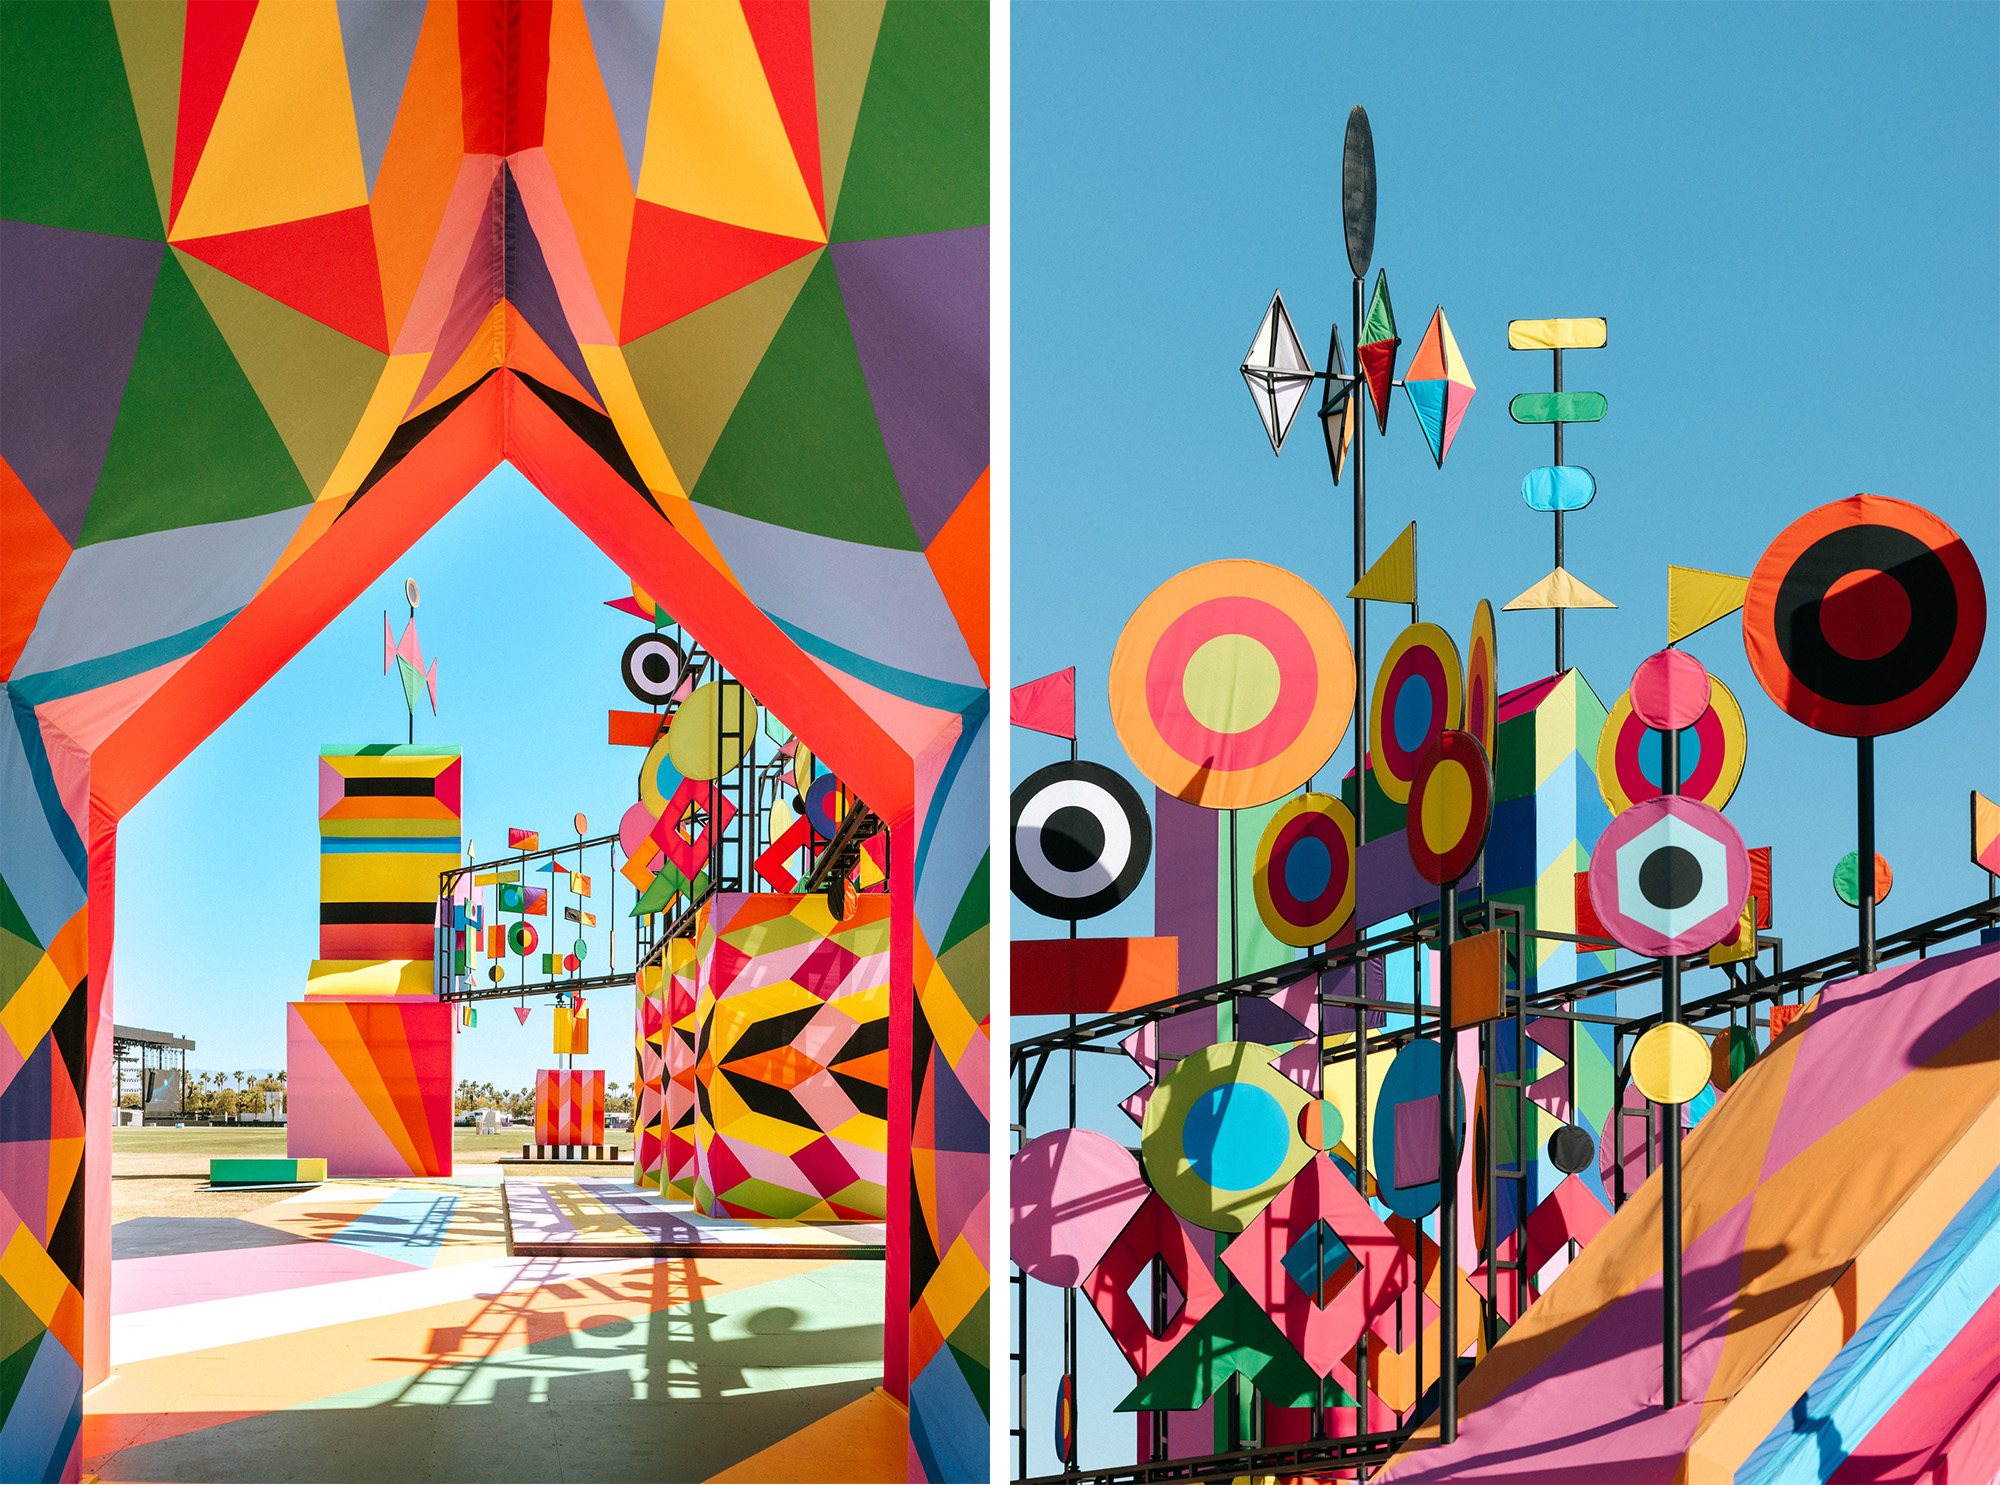 to side-by-side images of an installation at Coachella music festival with numerous geometric, colorful shapes